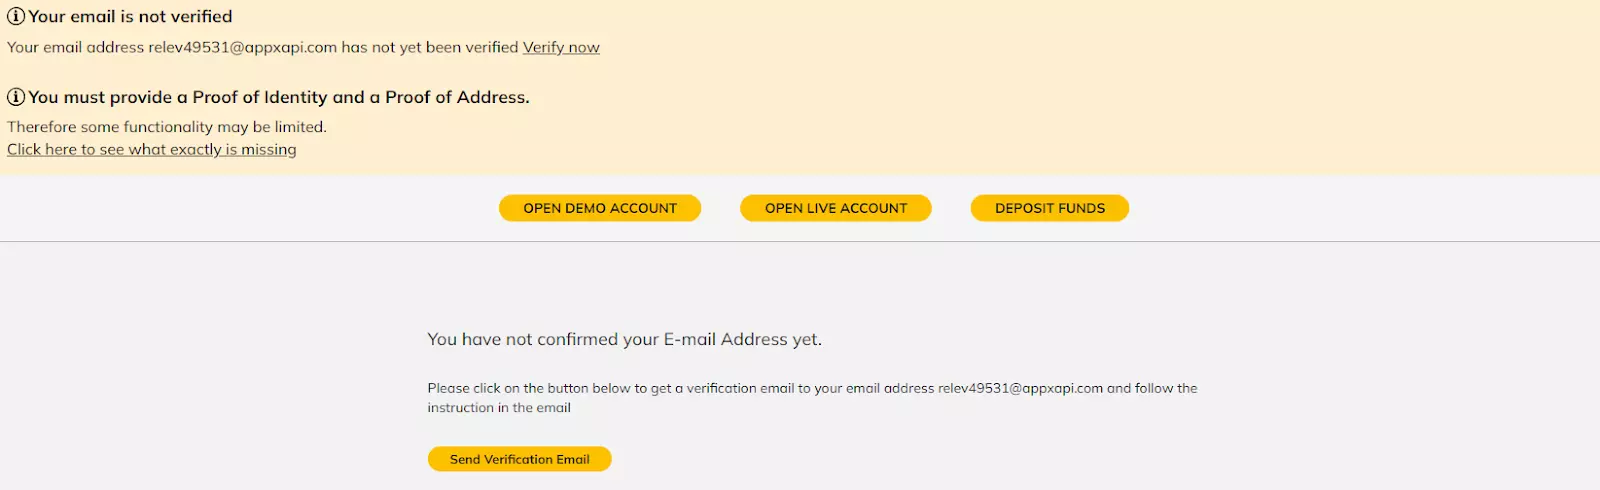 Review of OneRoyal’s User Account — Email verification